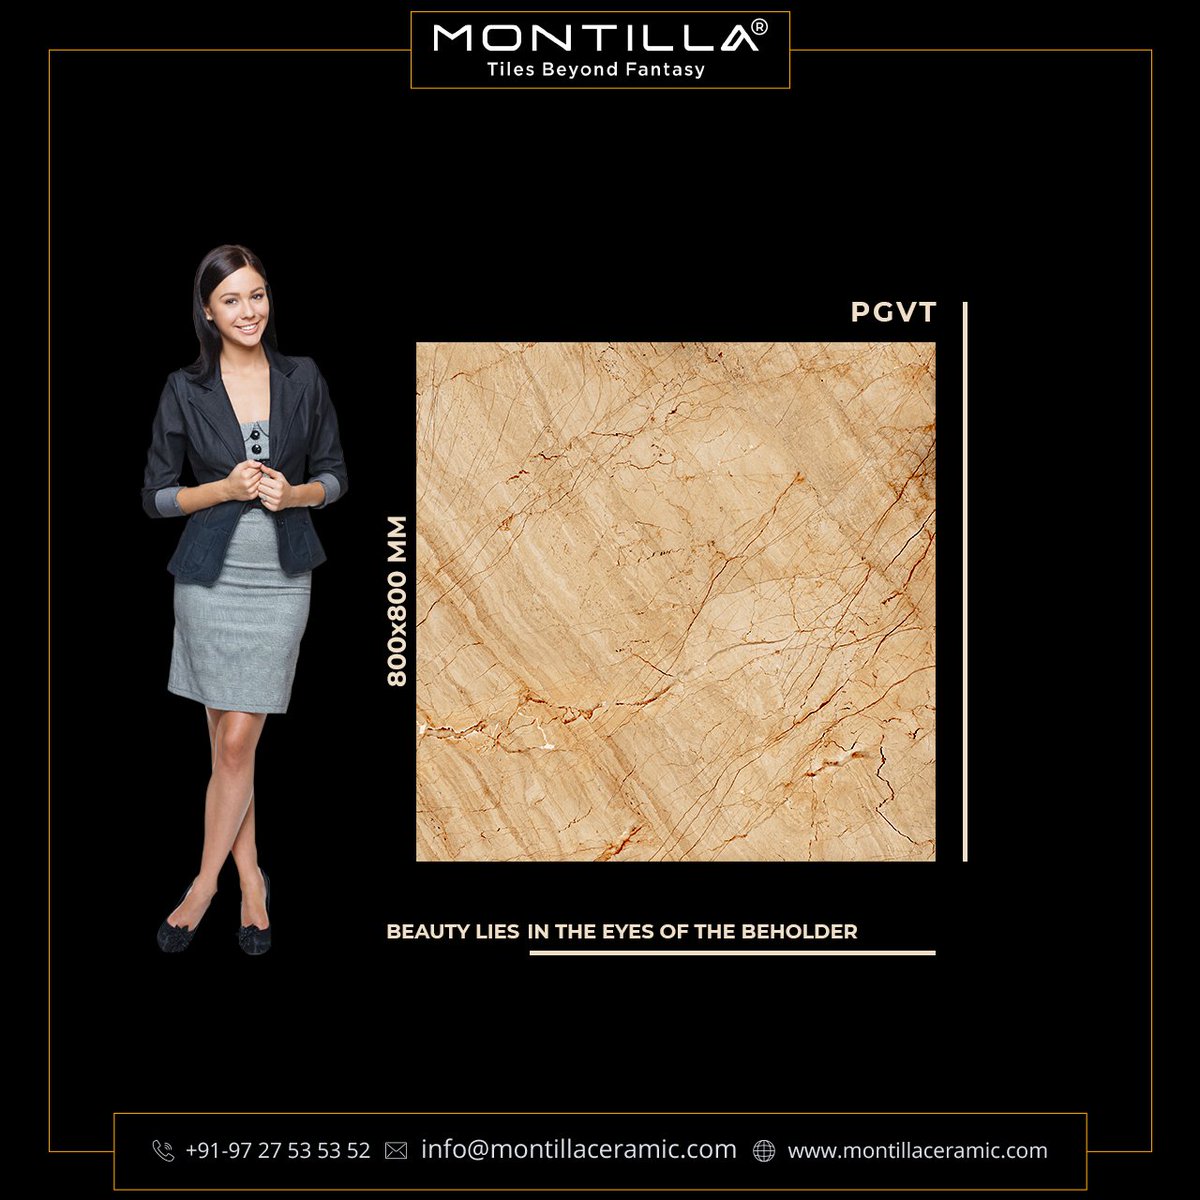 'Beauty lies in the eyes of the beholder.'

#montilla #montillaceramic #tiles #tilesbeyondfantacy #ceramic #ceramictiles #GVT #slab #800x800mm #newcollection #export #exportdesign #floortiles #interiordesign #porcelaintile #buildingmaterials #architecture #polishedtiles